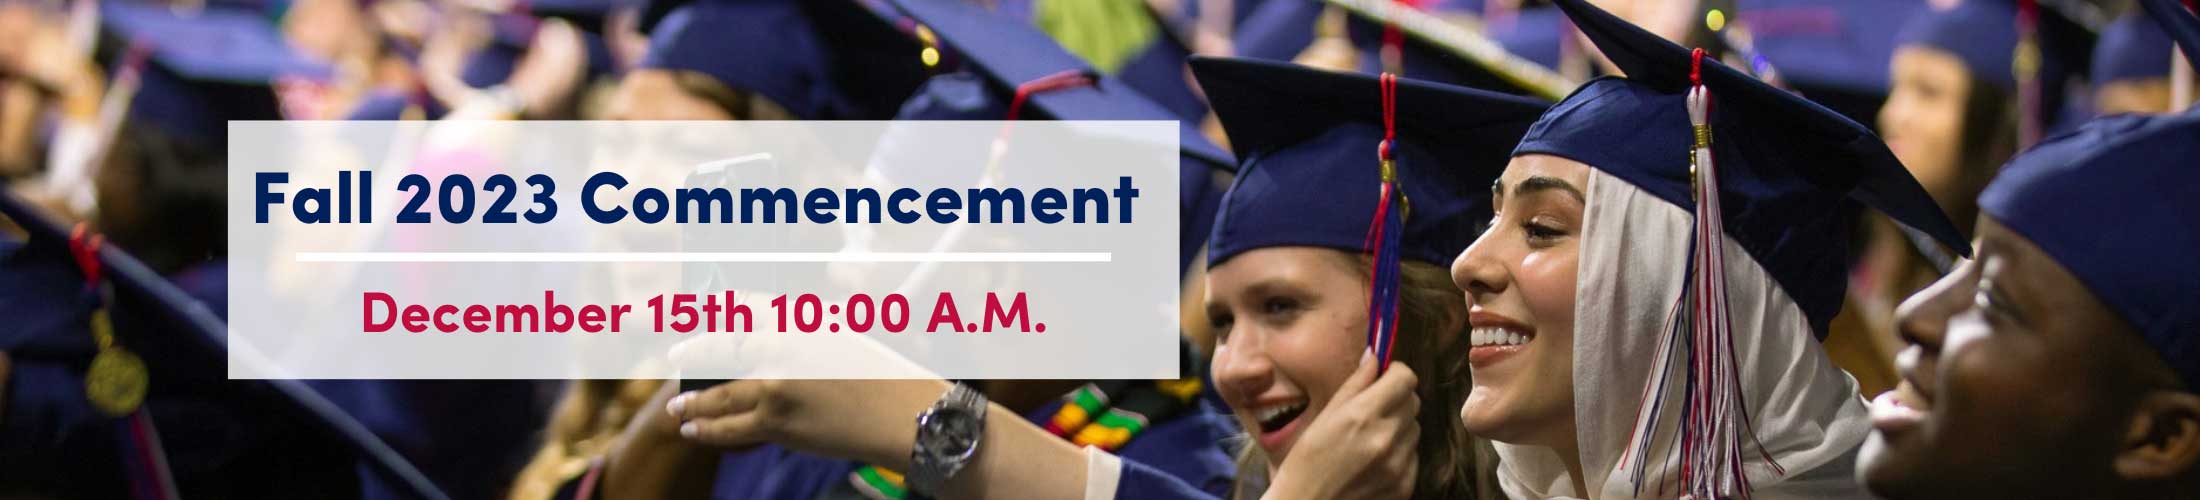 Fall 2023 Commencement December 15th 10:00 am